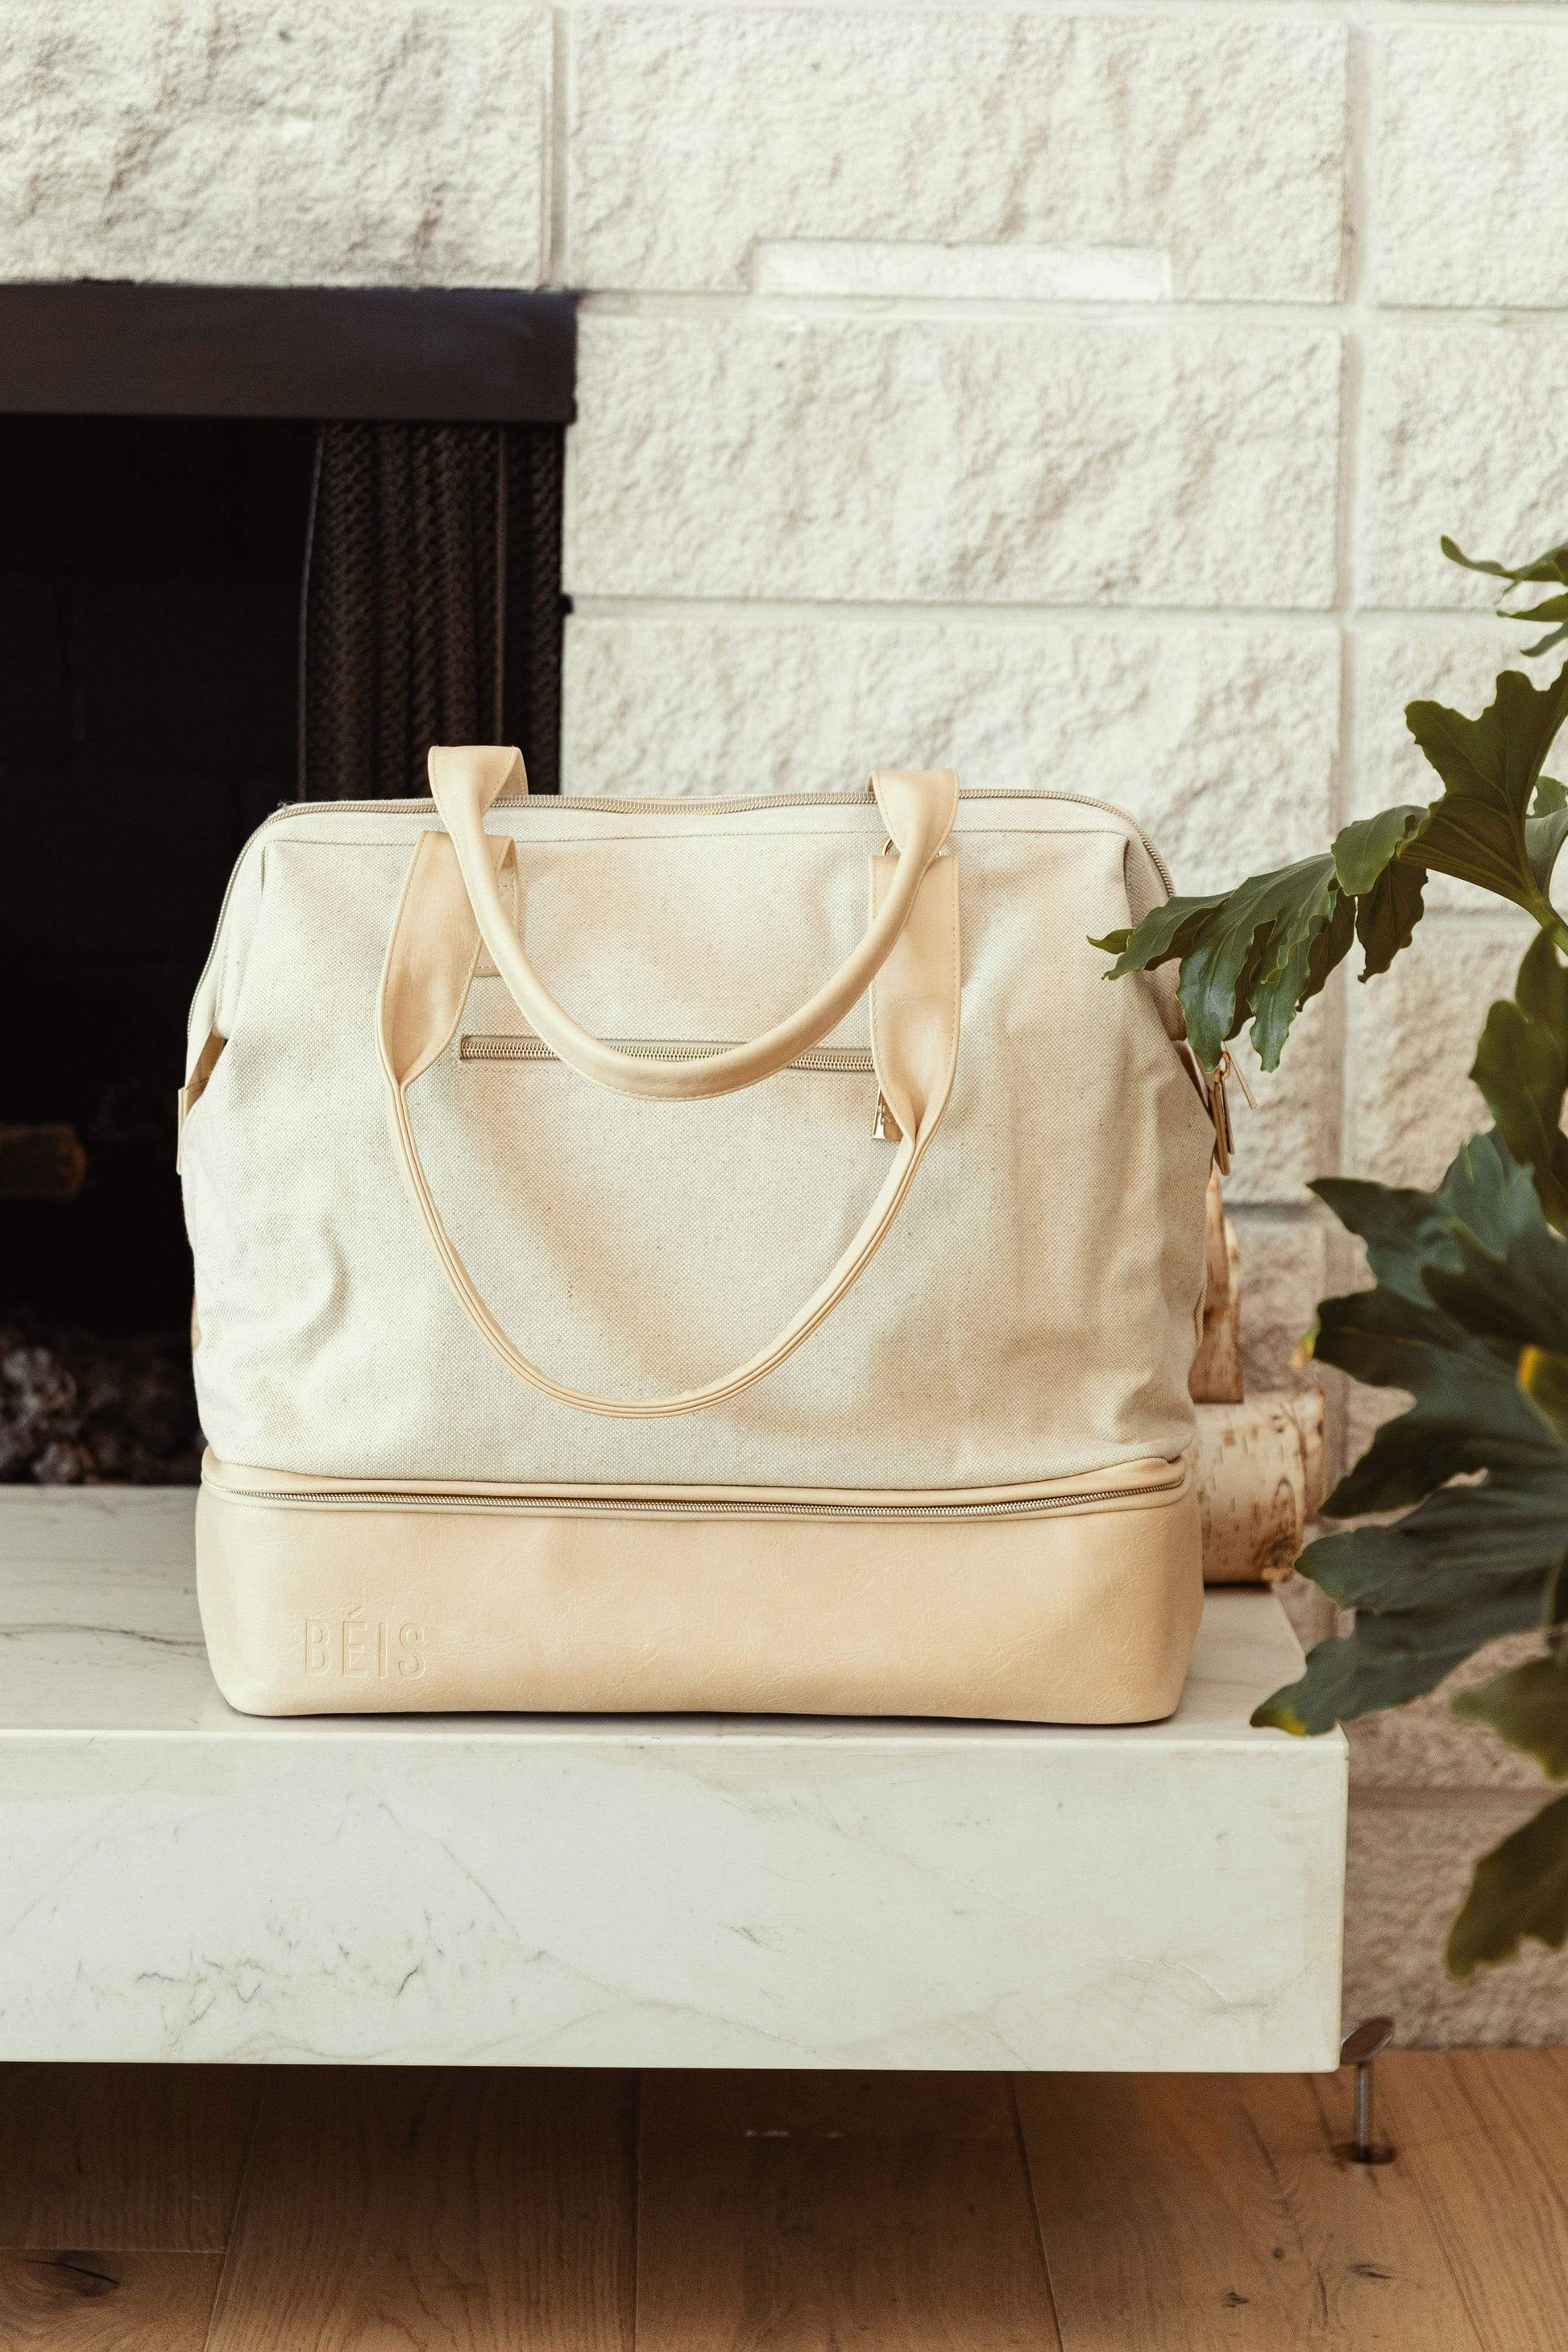 BEIS by Shay Mitchell The Convertible Mini Weekender in Beige near fireplace